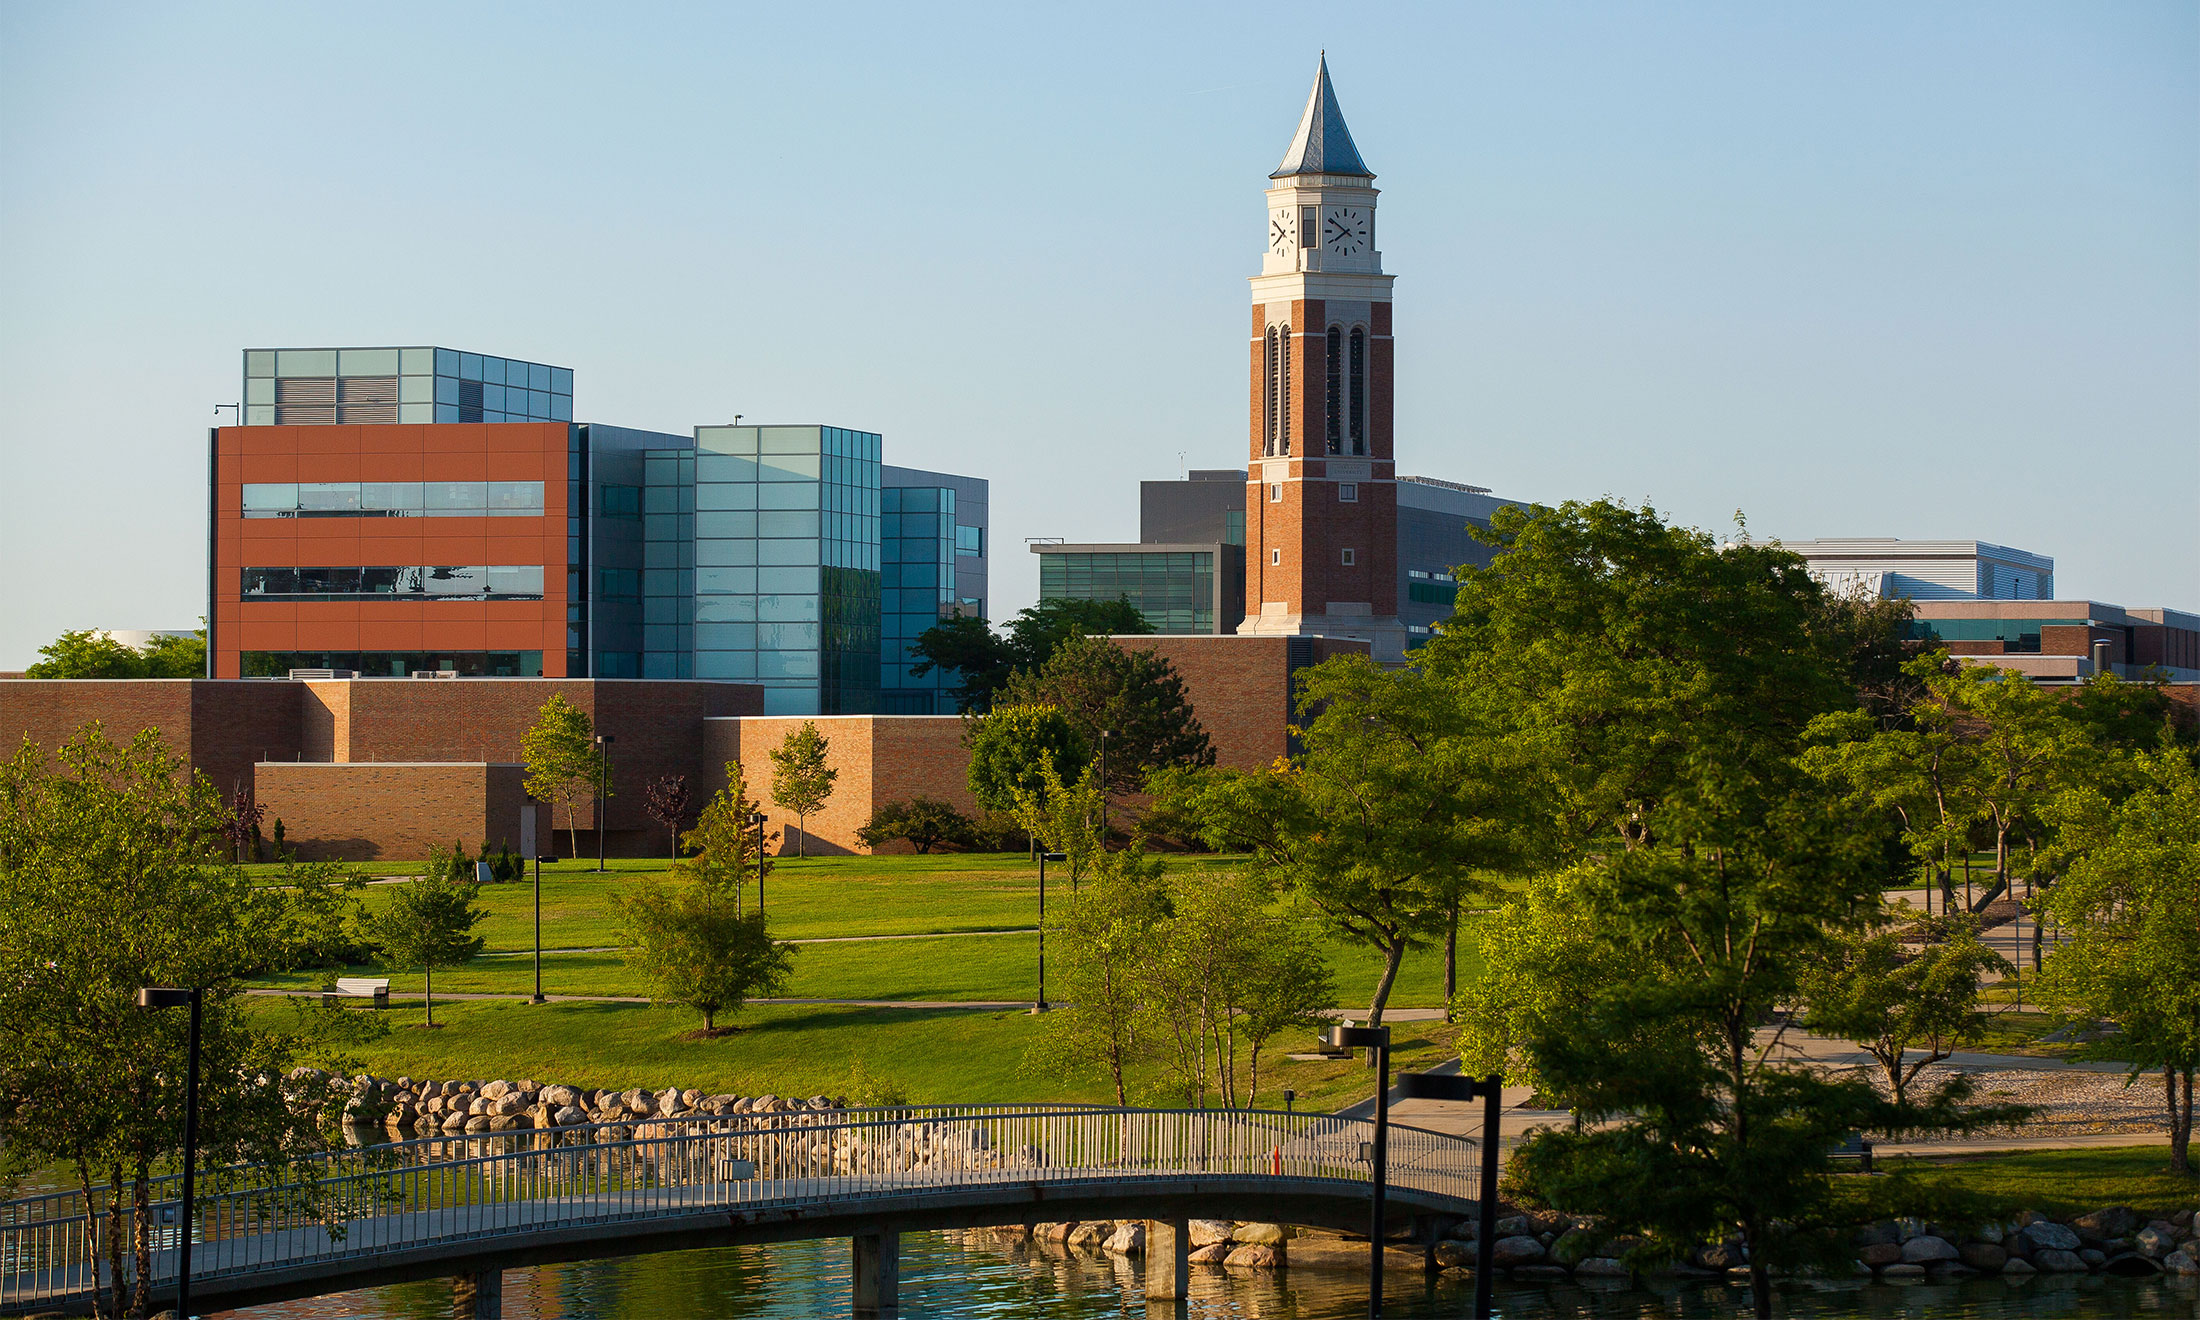 Oakland University offers test optional admission for fall 2020 and